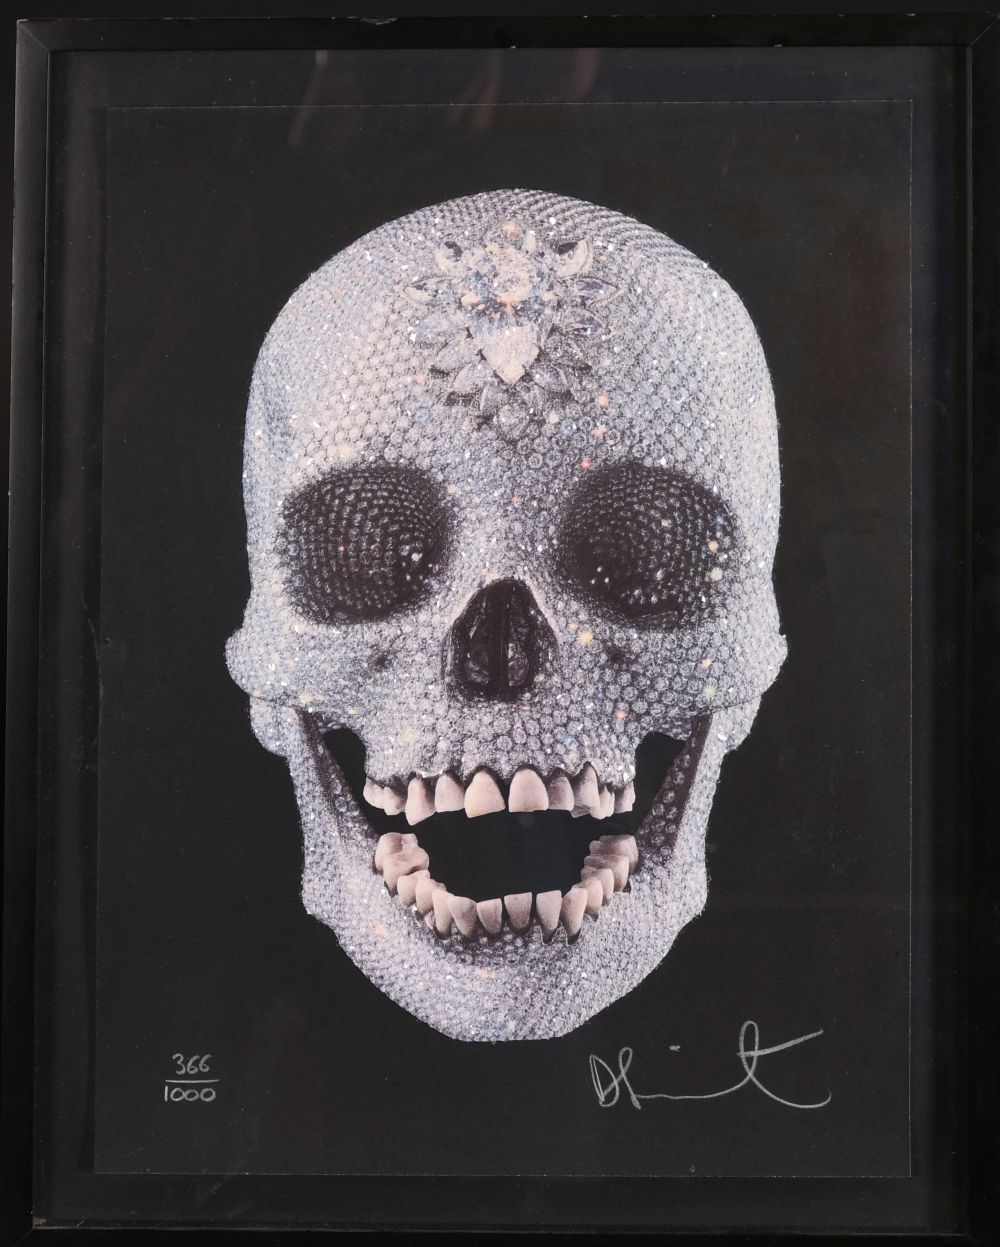 Damien Hirst, (B. 1965), "For the Love of God" Screenprint in colours with diamond dust on wove - Image 2 of 6